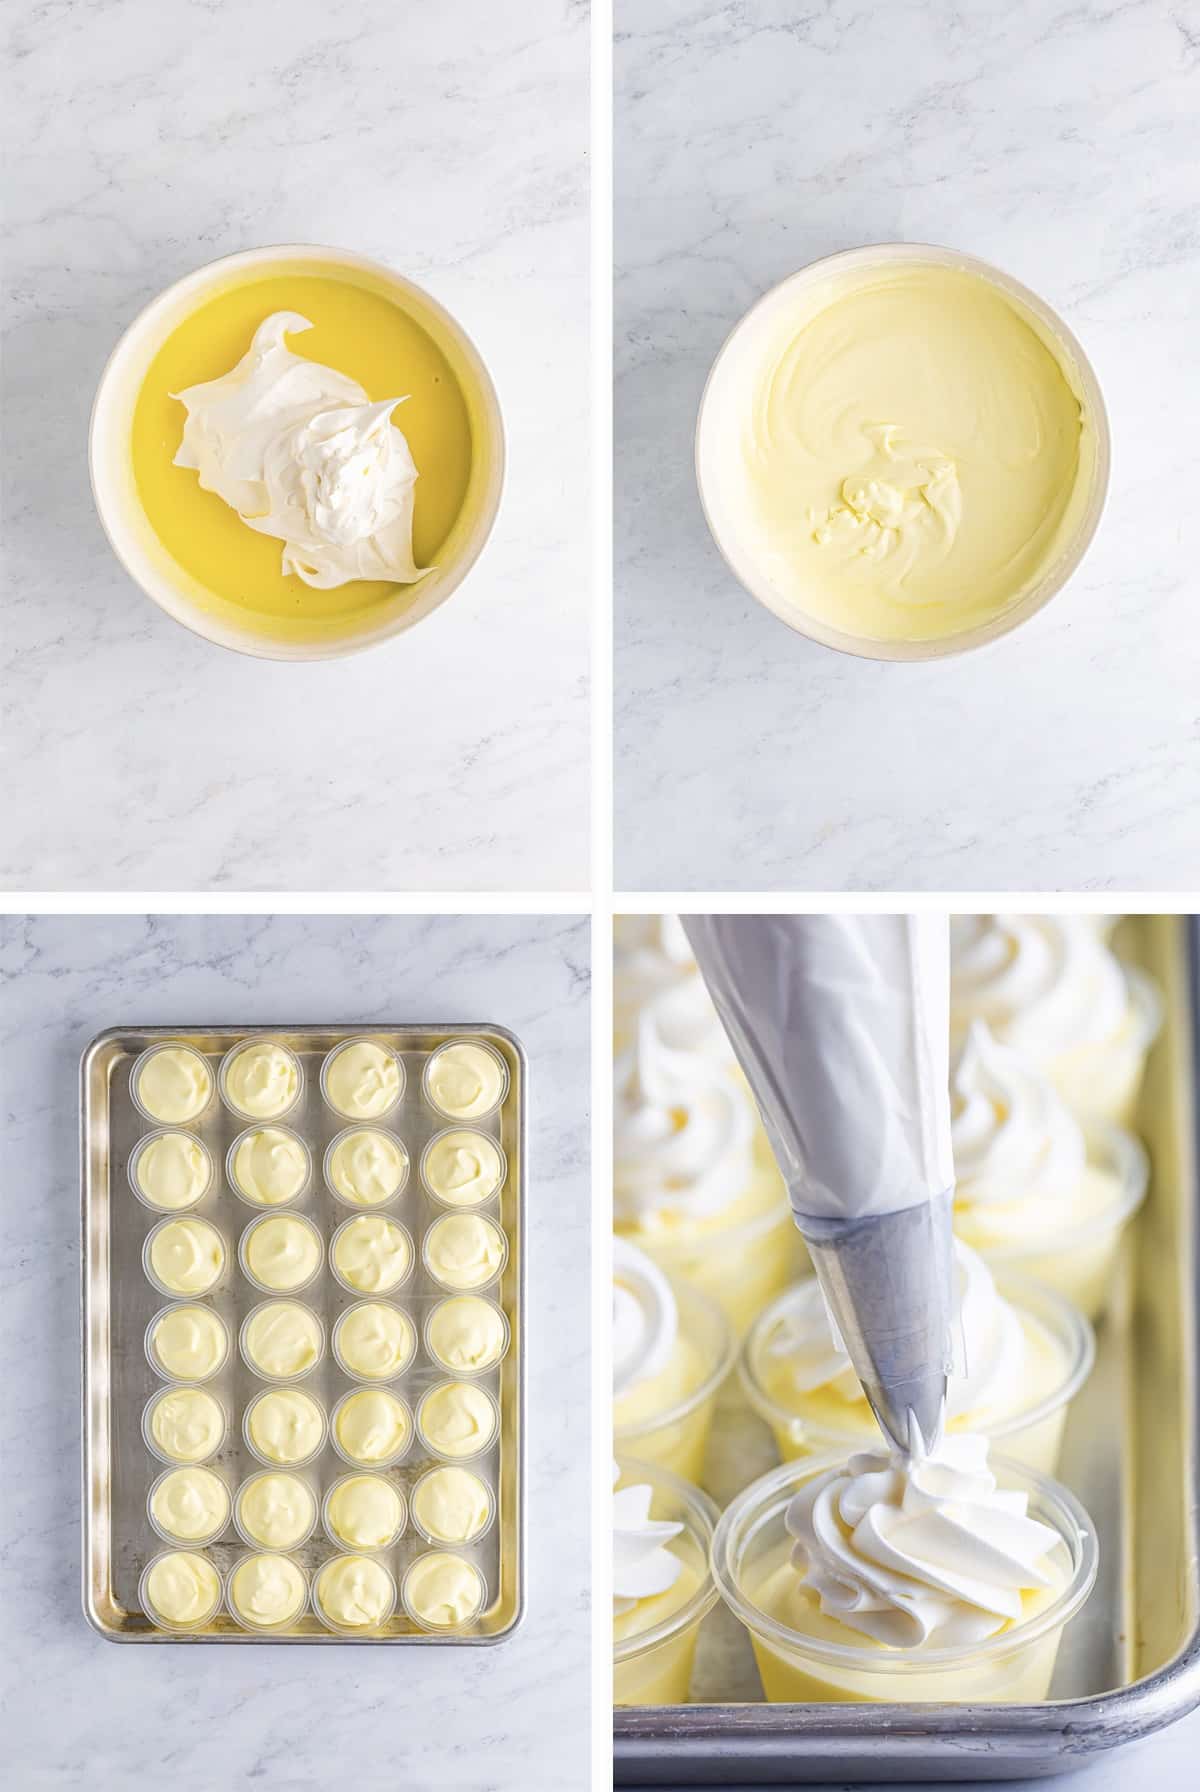 Collage of images showing the final steps on how to make lemon pudding shots